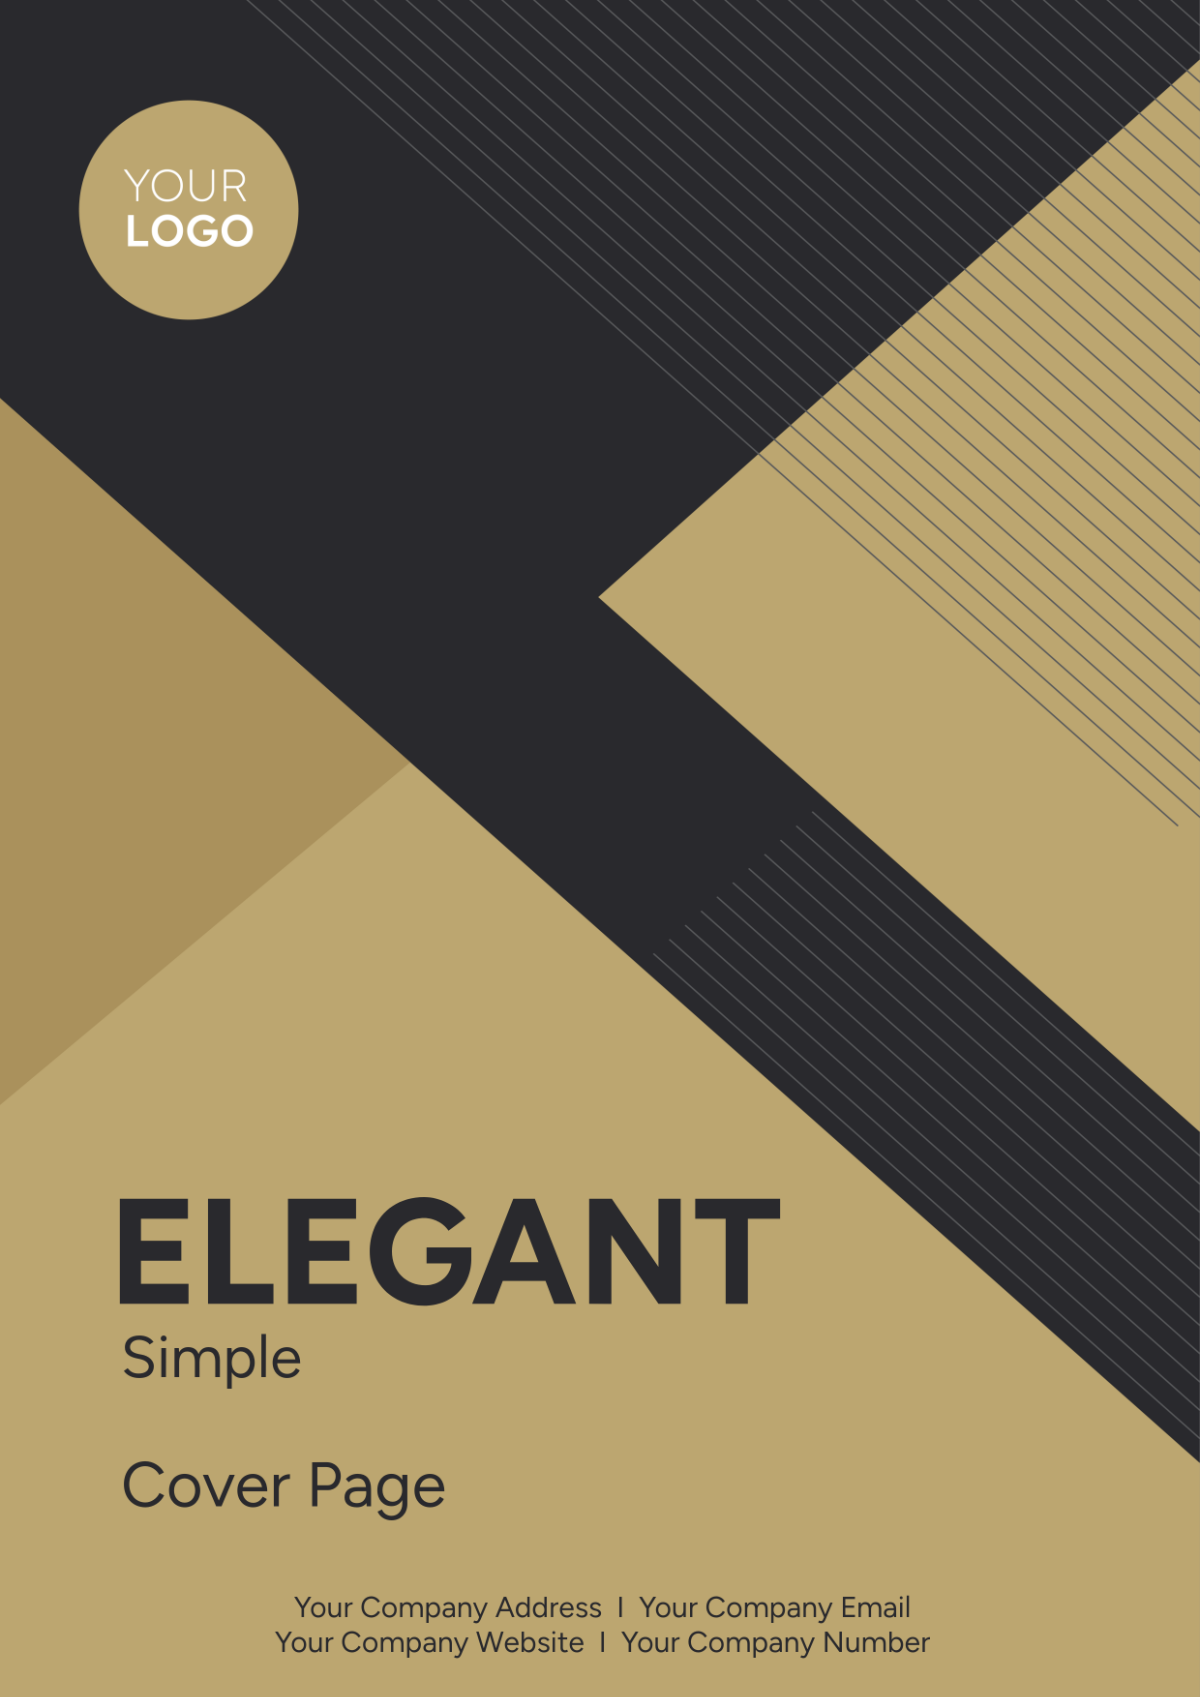 Elegant Simple Cover Page